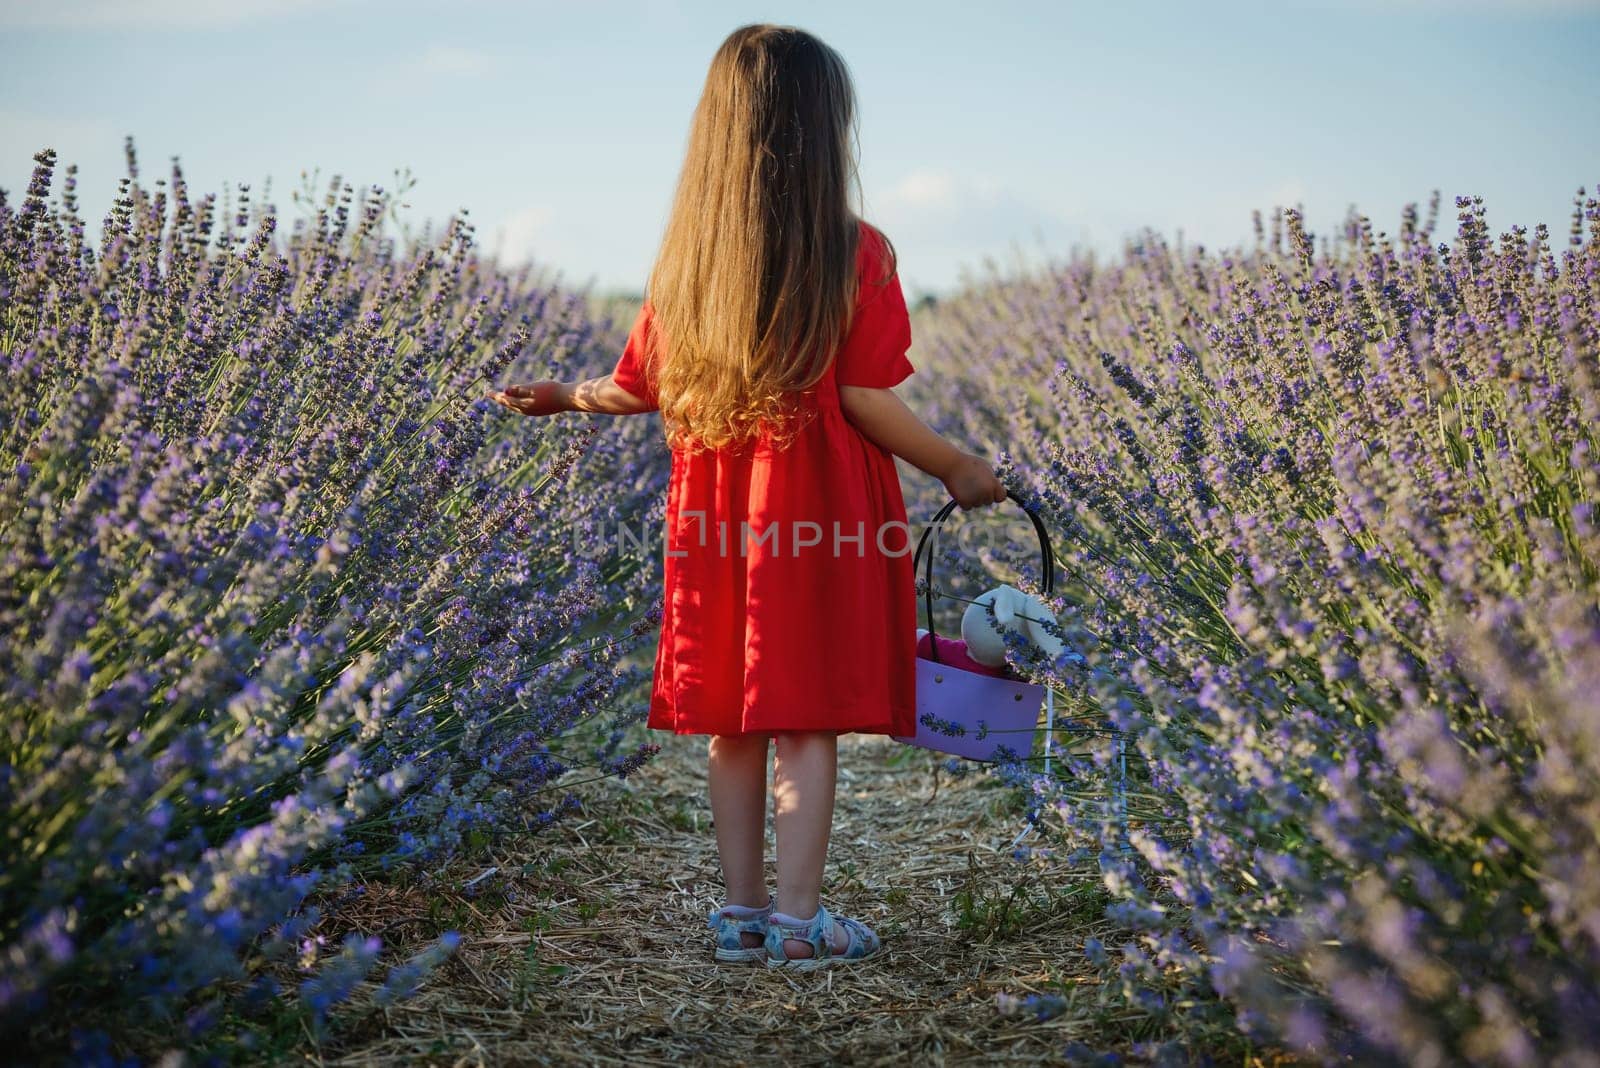 A 4-5 year old girl in a red dress walks through a lavender field in nice summer weather. View from the back. by leonik